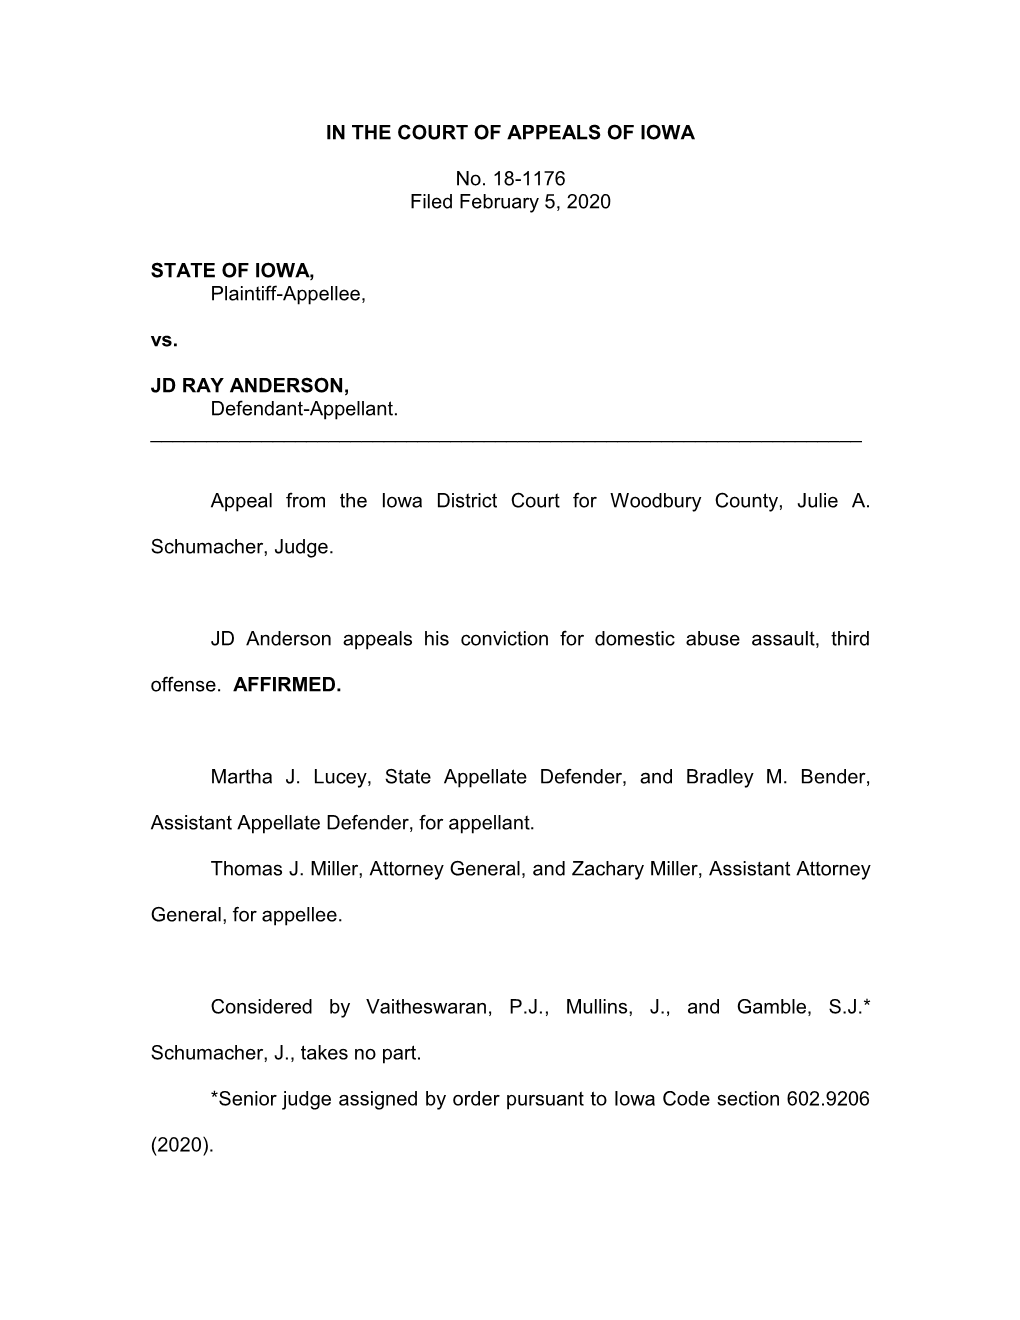 IN the COURT of APPEALS of IOWA No. 18-1176 Filed February 5, 2020 STATE of IOWA, Plaintiff-Appellee, Vs. JD RAY ANDERSON, Defen